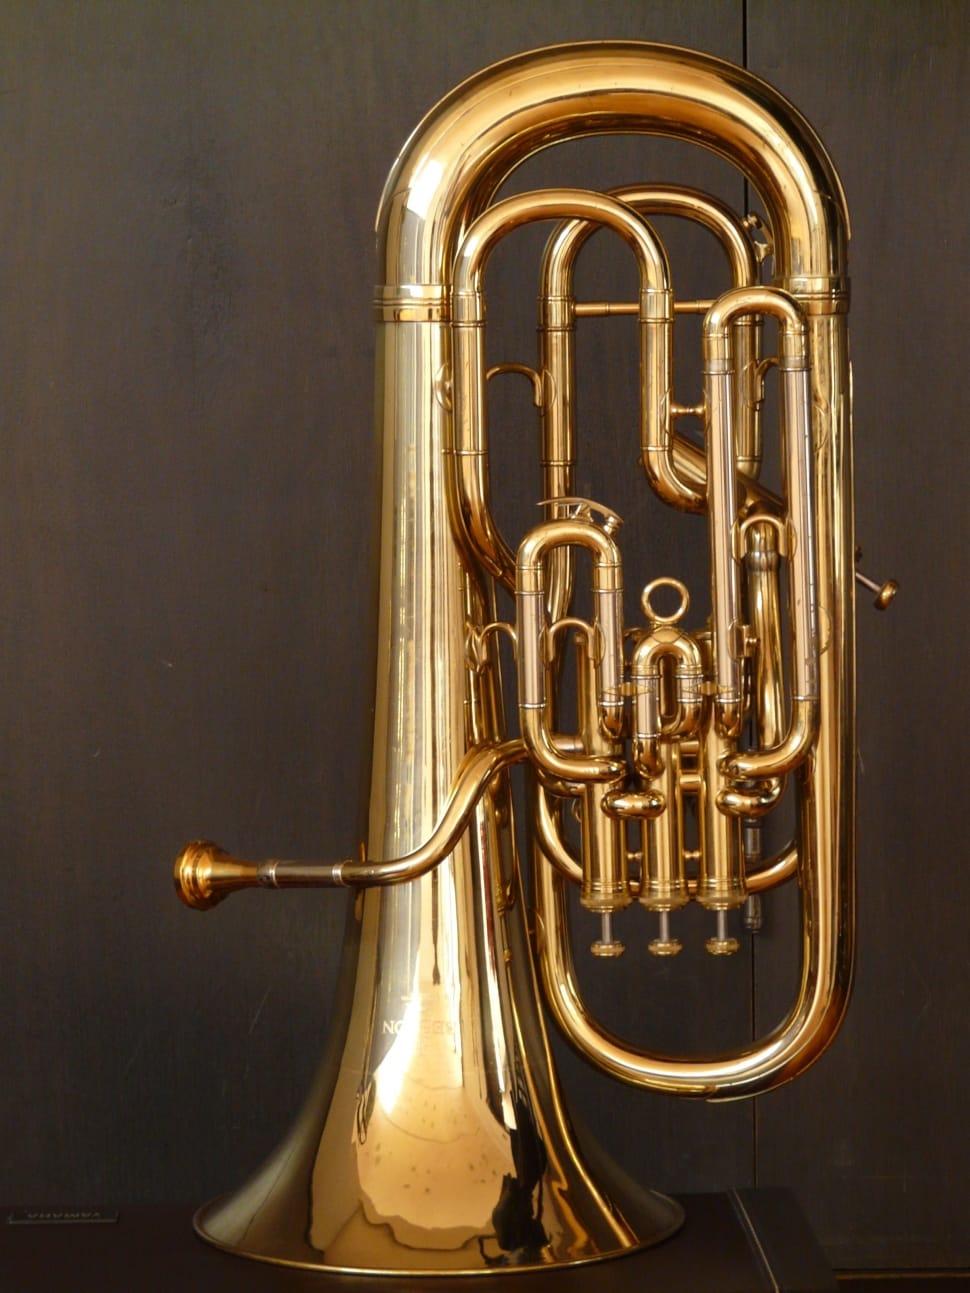 Gold French Horn - 楽器 ラッパ , HD Wallpaper & Backgrounds